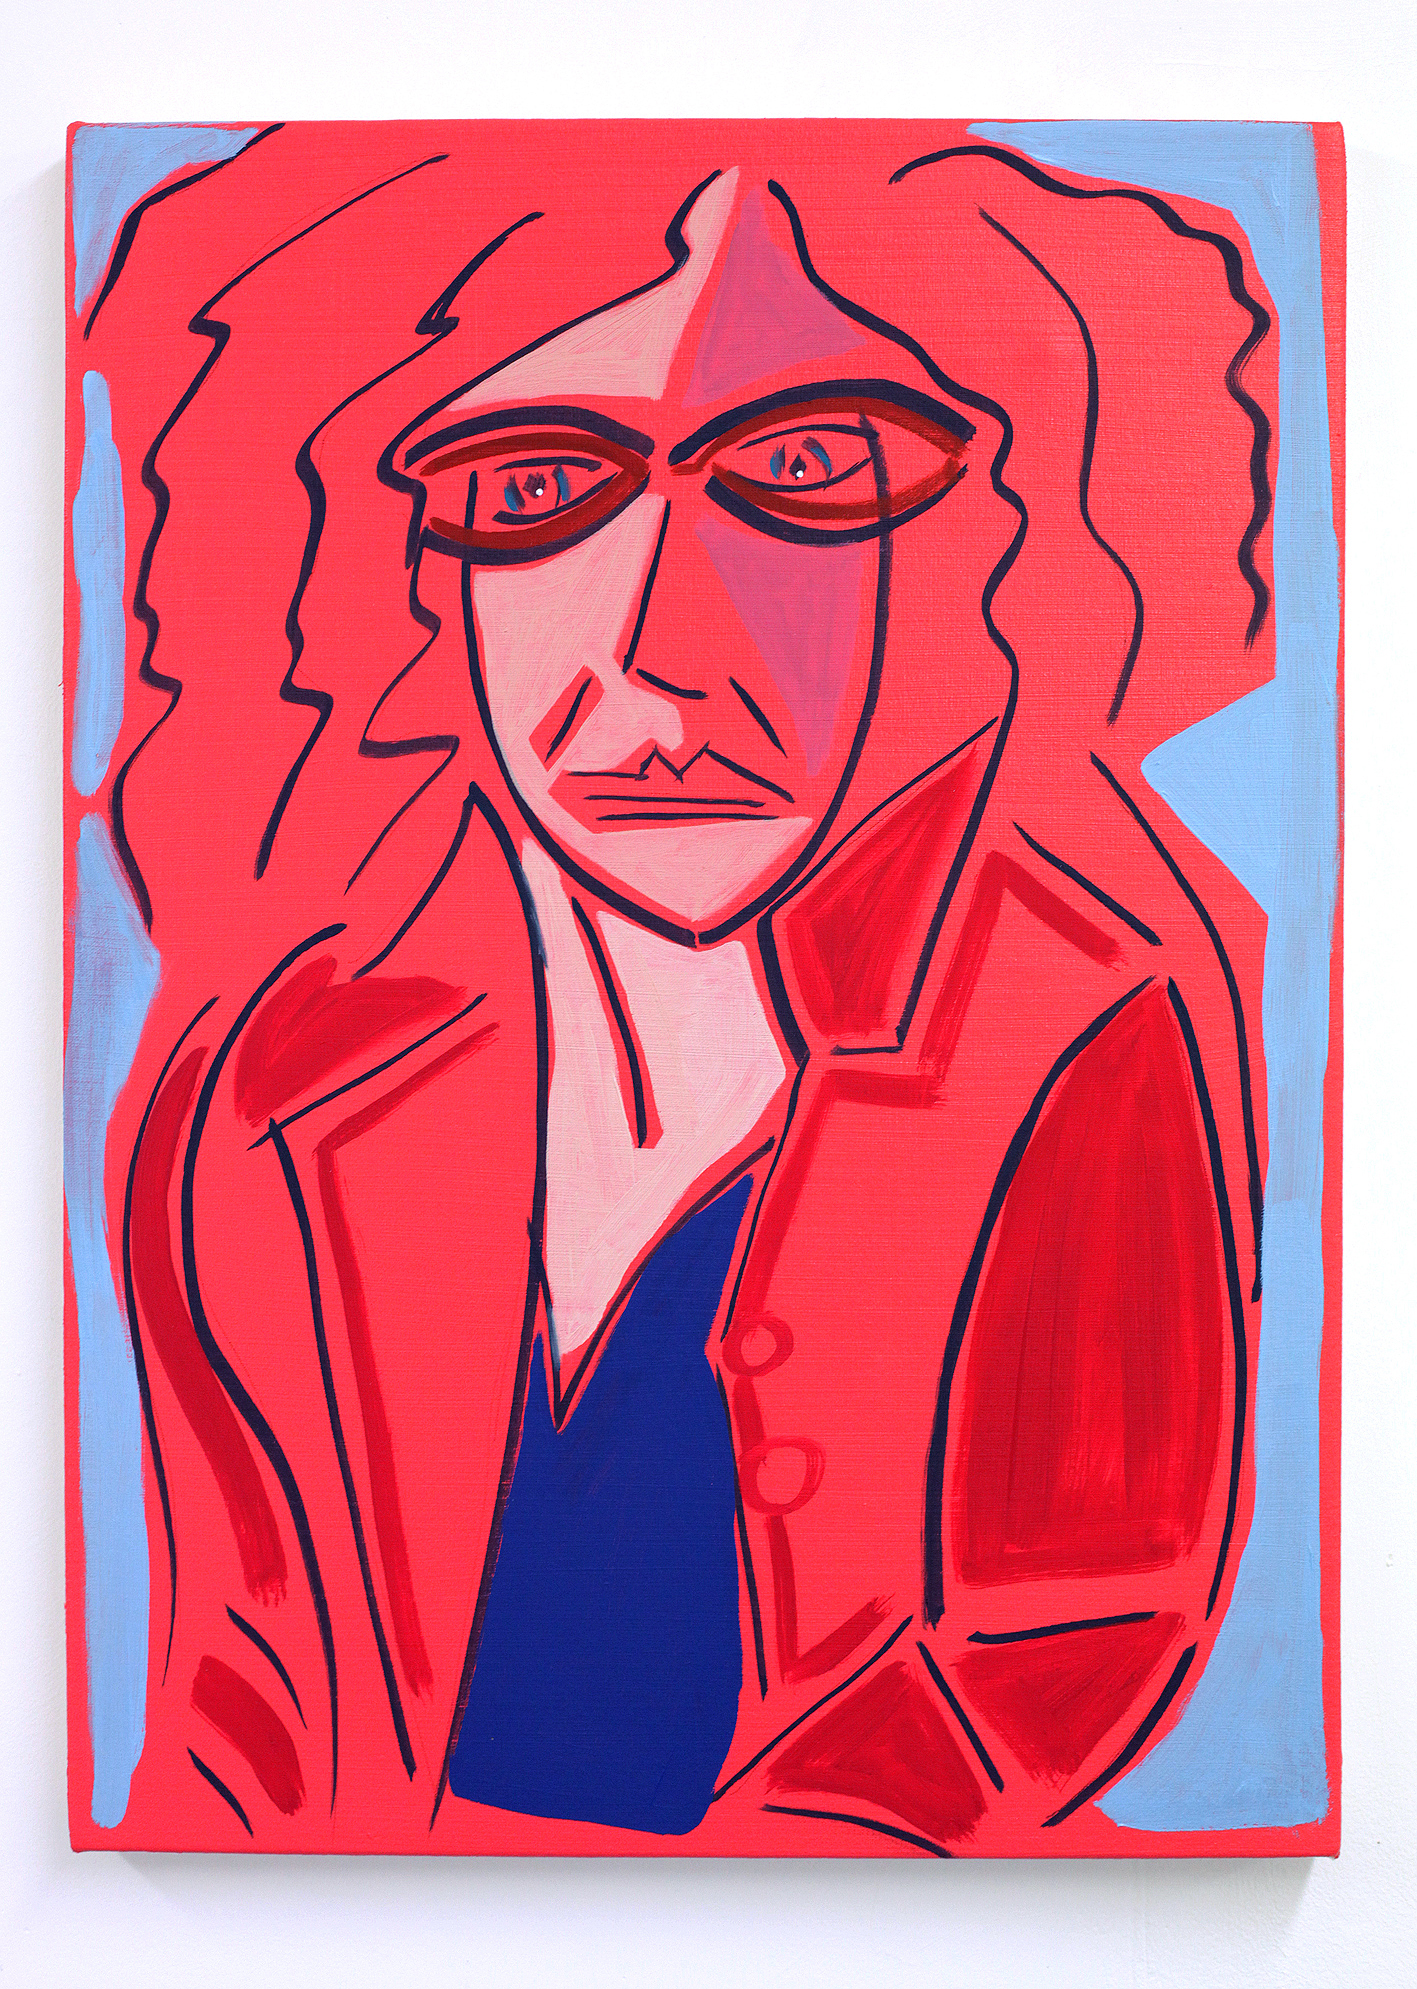 'Fraubraun (with red felt jacket from the Italian market)', 2015/17, oil on canvas, 30 x 40 cm